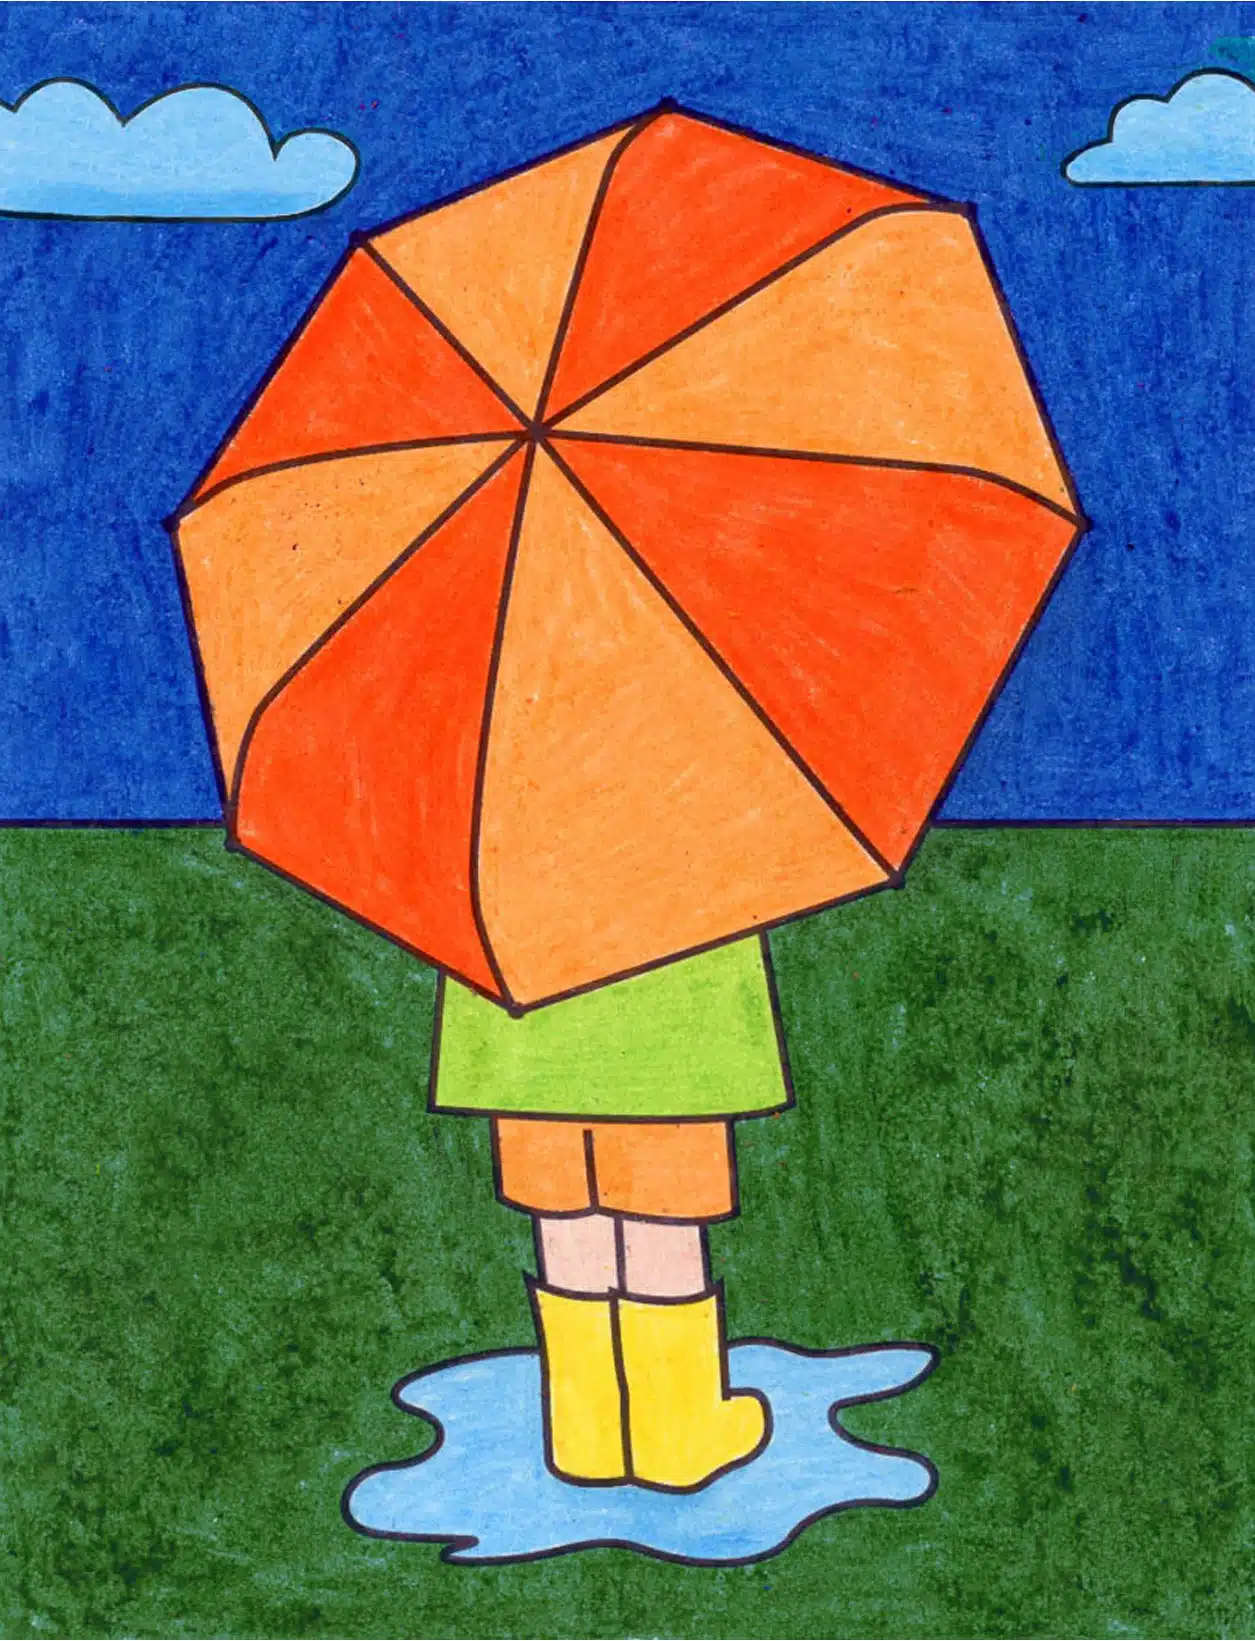 Easy How to Draw an Umbrella Tutorial Video and Umbrella Coloring Page